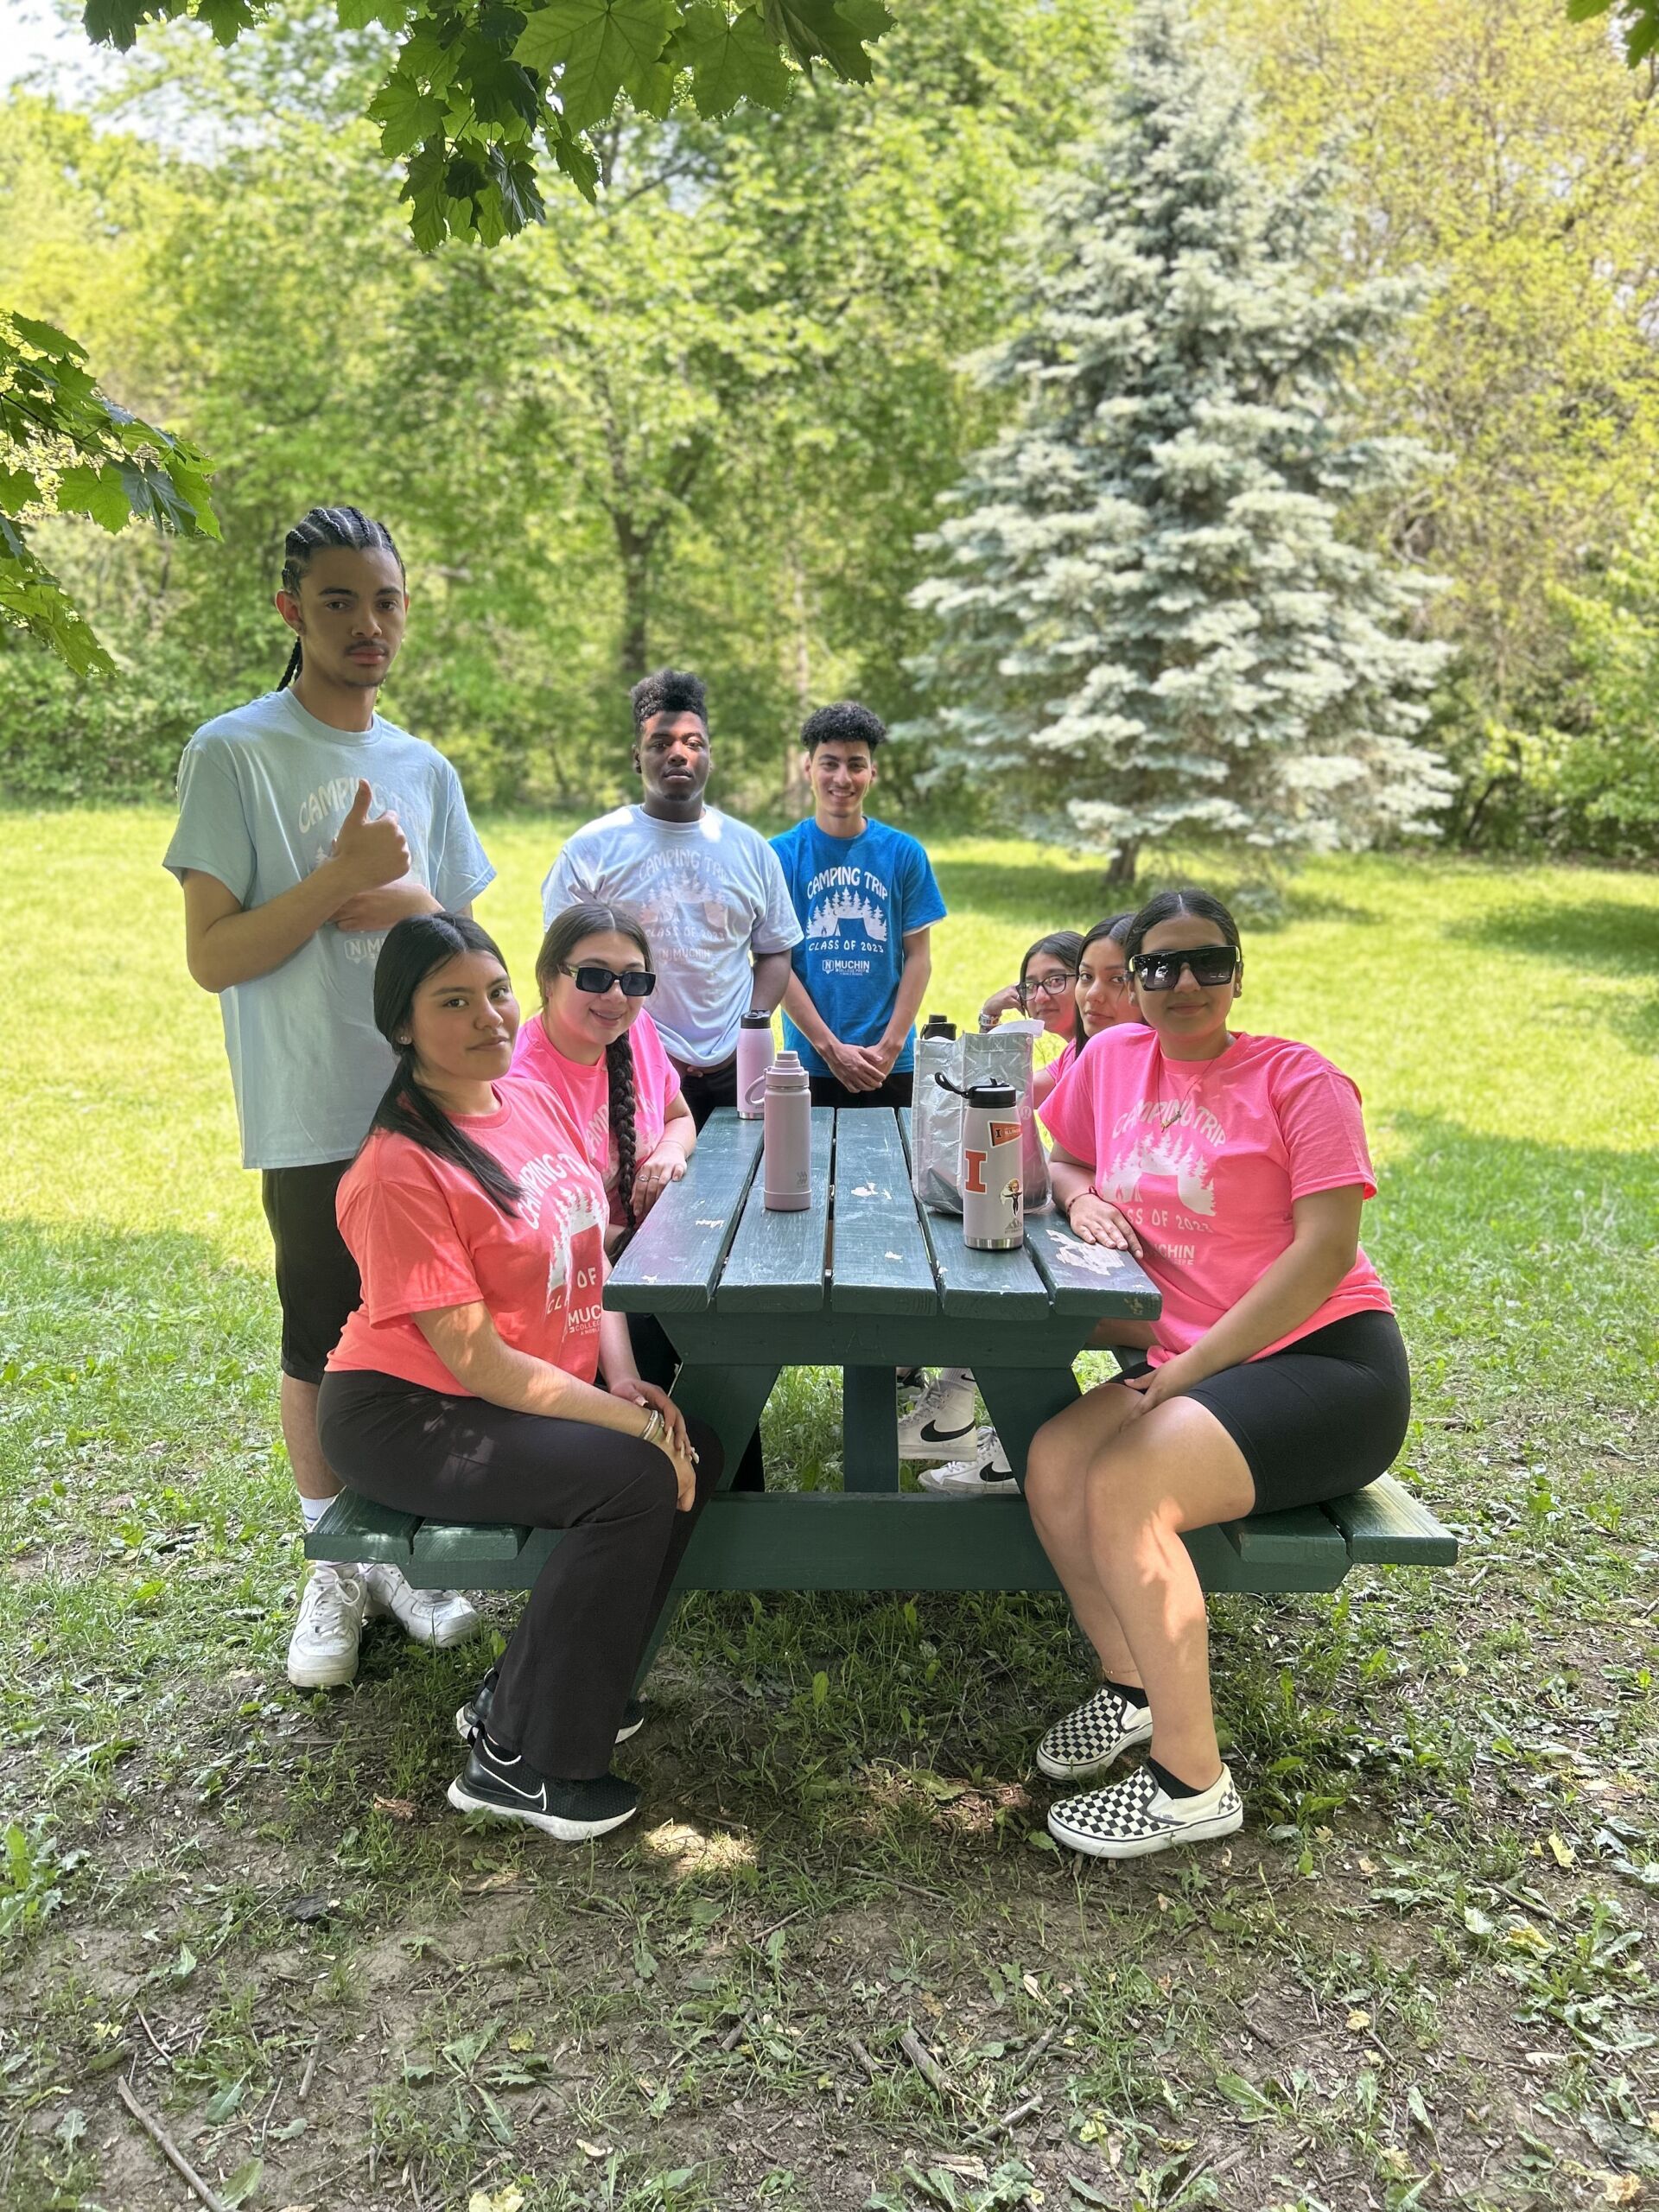 Students are gathered together around a table. Four students are sitting on the table seats while others are standing around the table. One student is posing with thumbs up.